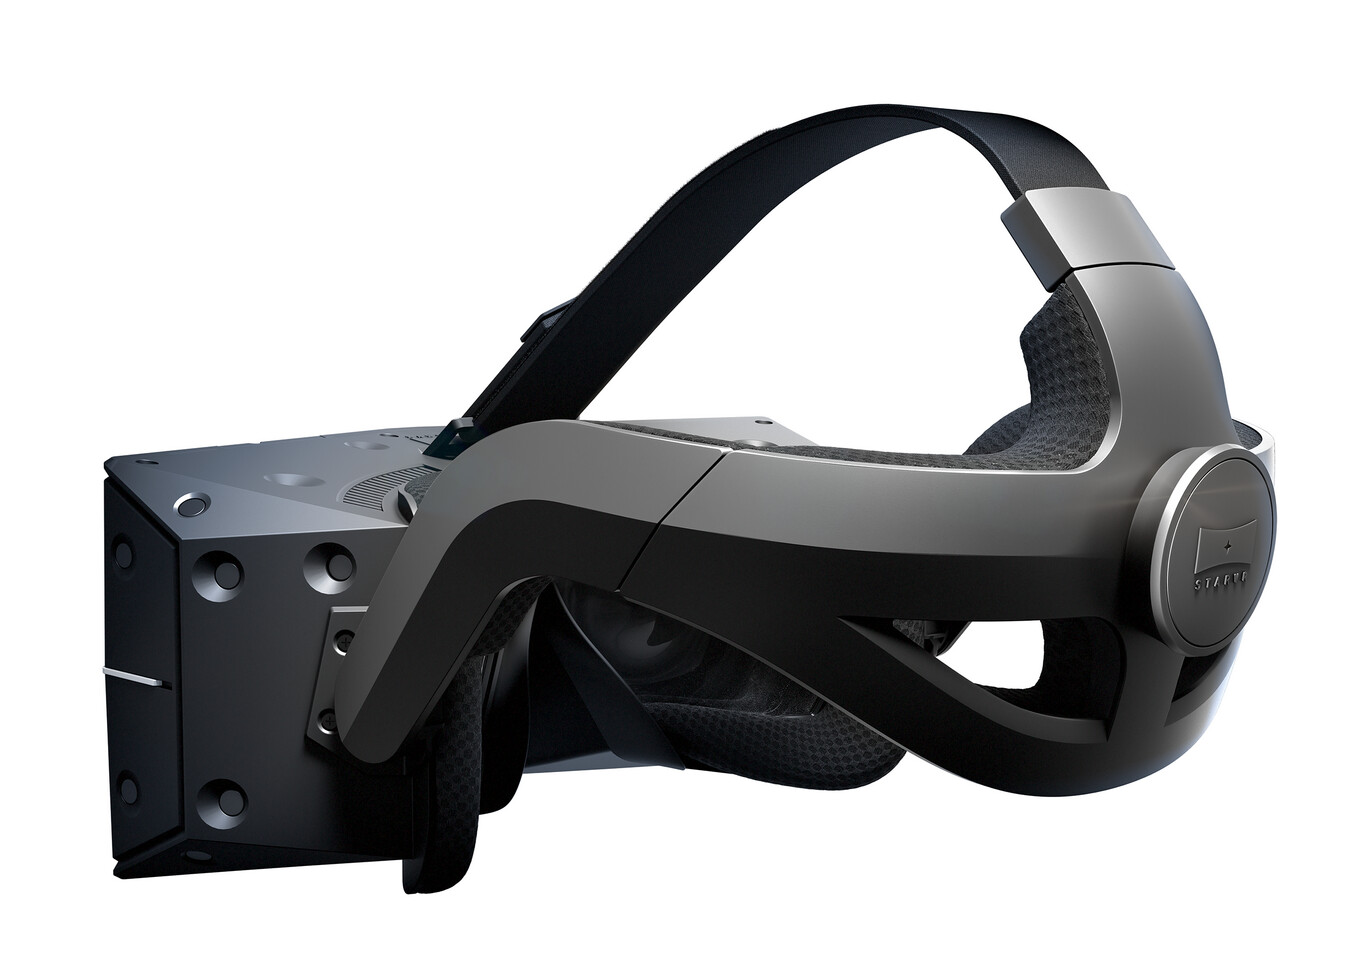 StarVR One VR Headset Now Available for Purchase | TechPowerUp